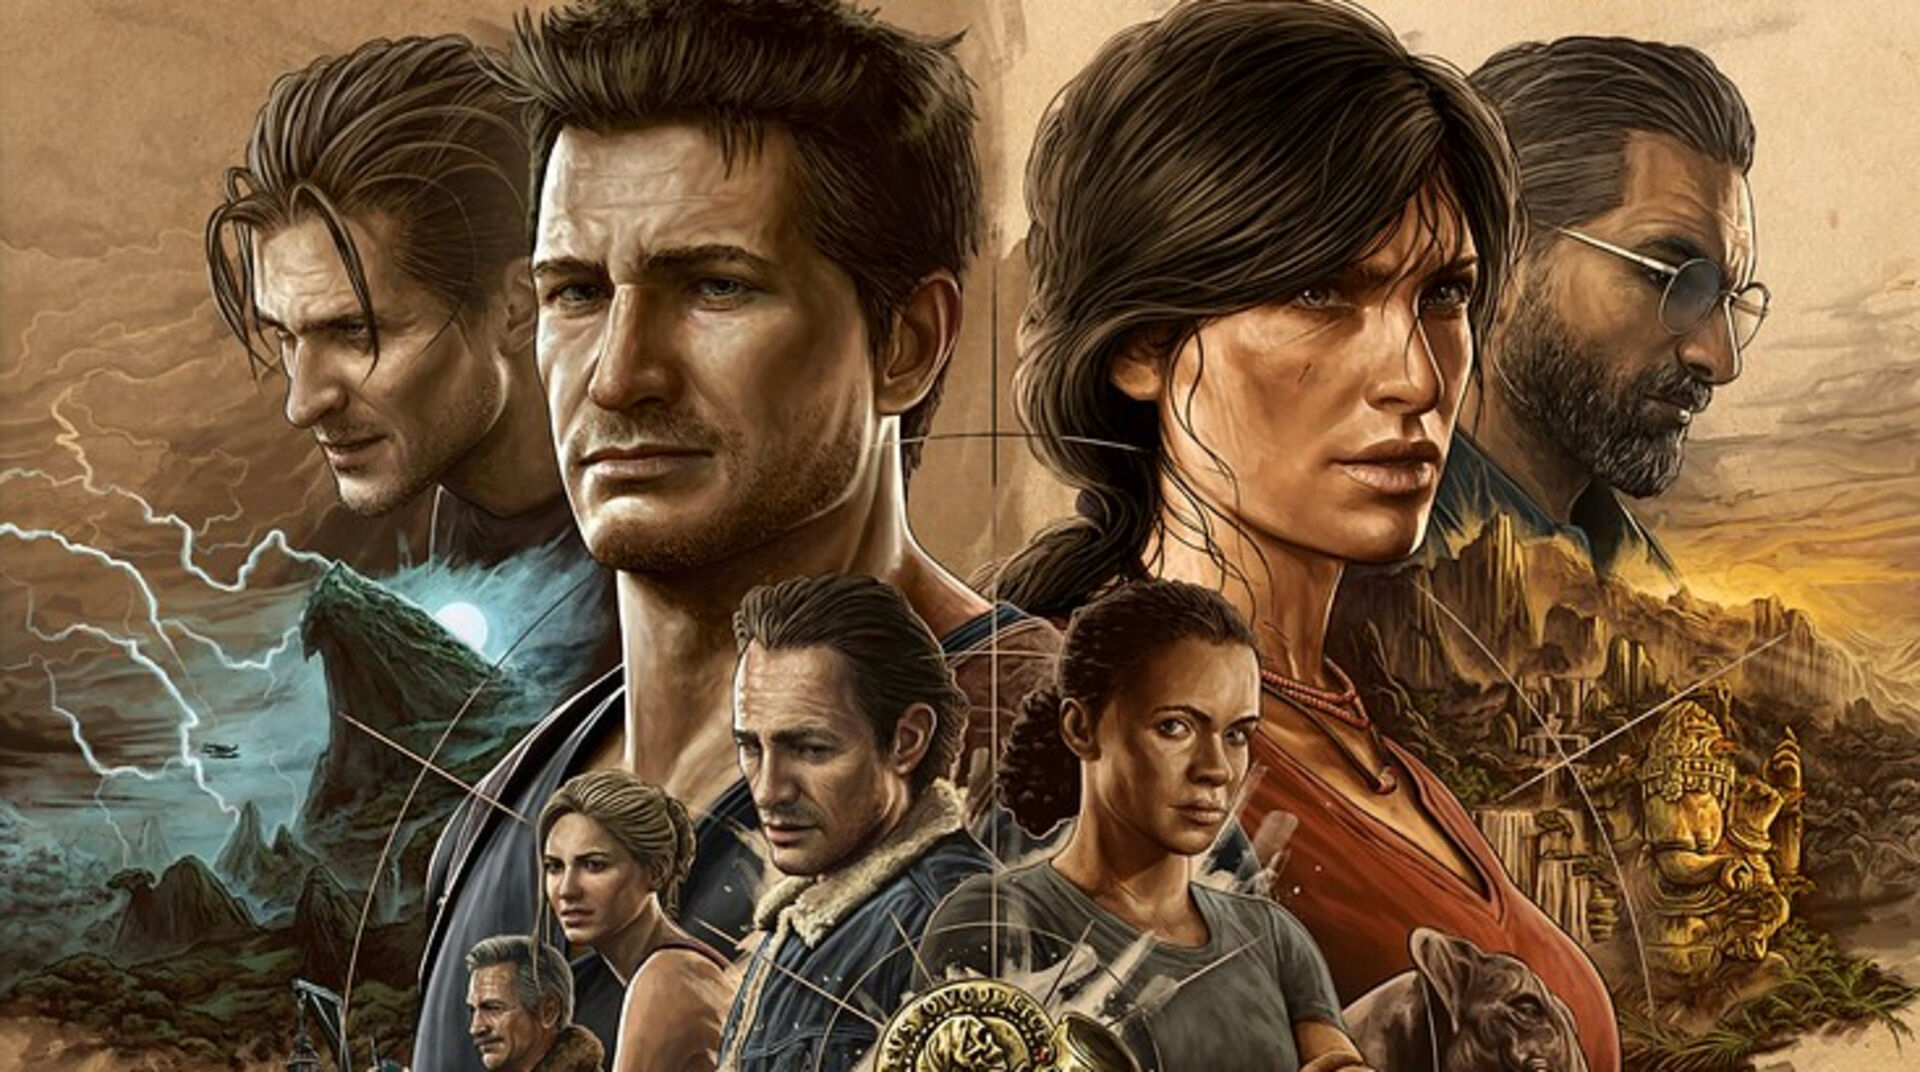 Three Reasons Why 'Uncharted 3' is Weaker than 'Uncharted 2